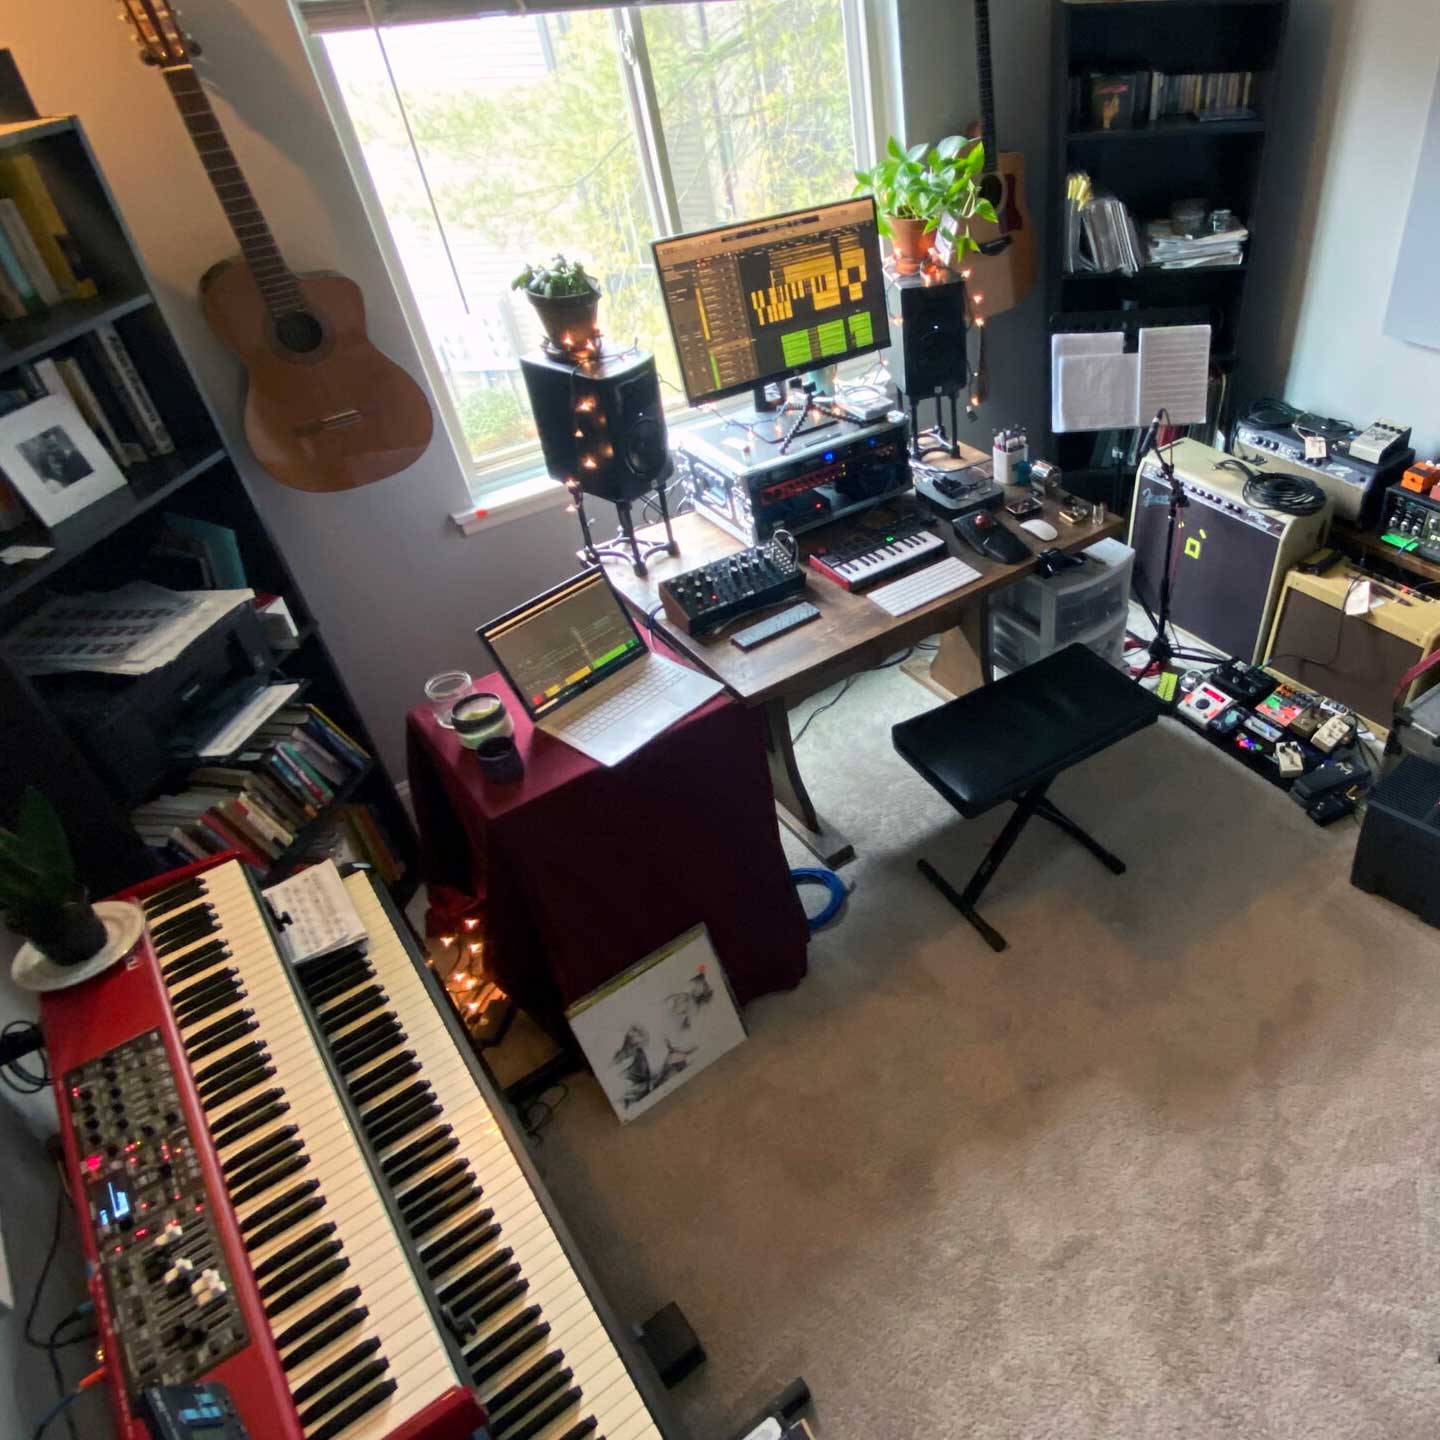 Home office studio with keyboard, amplifiers, and other musical equipment